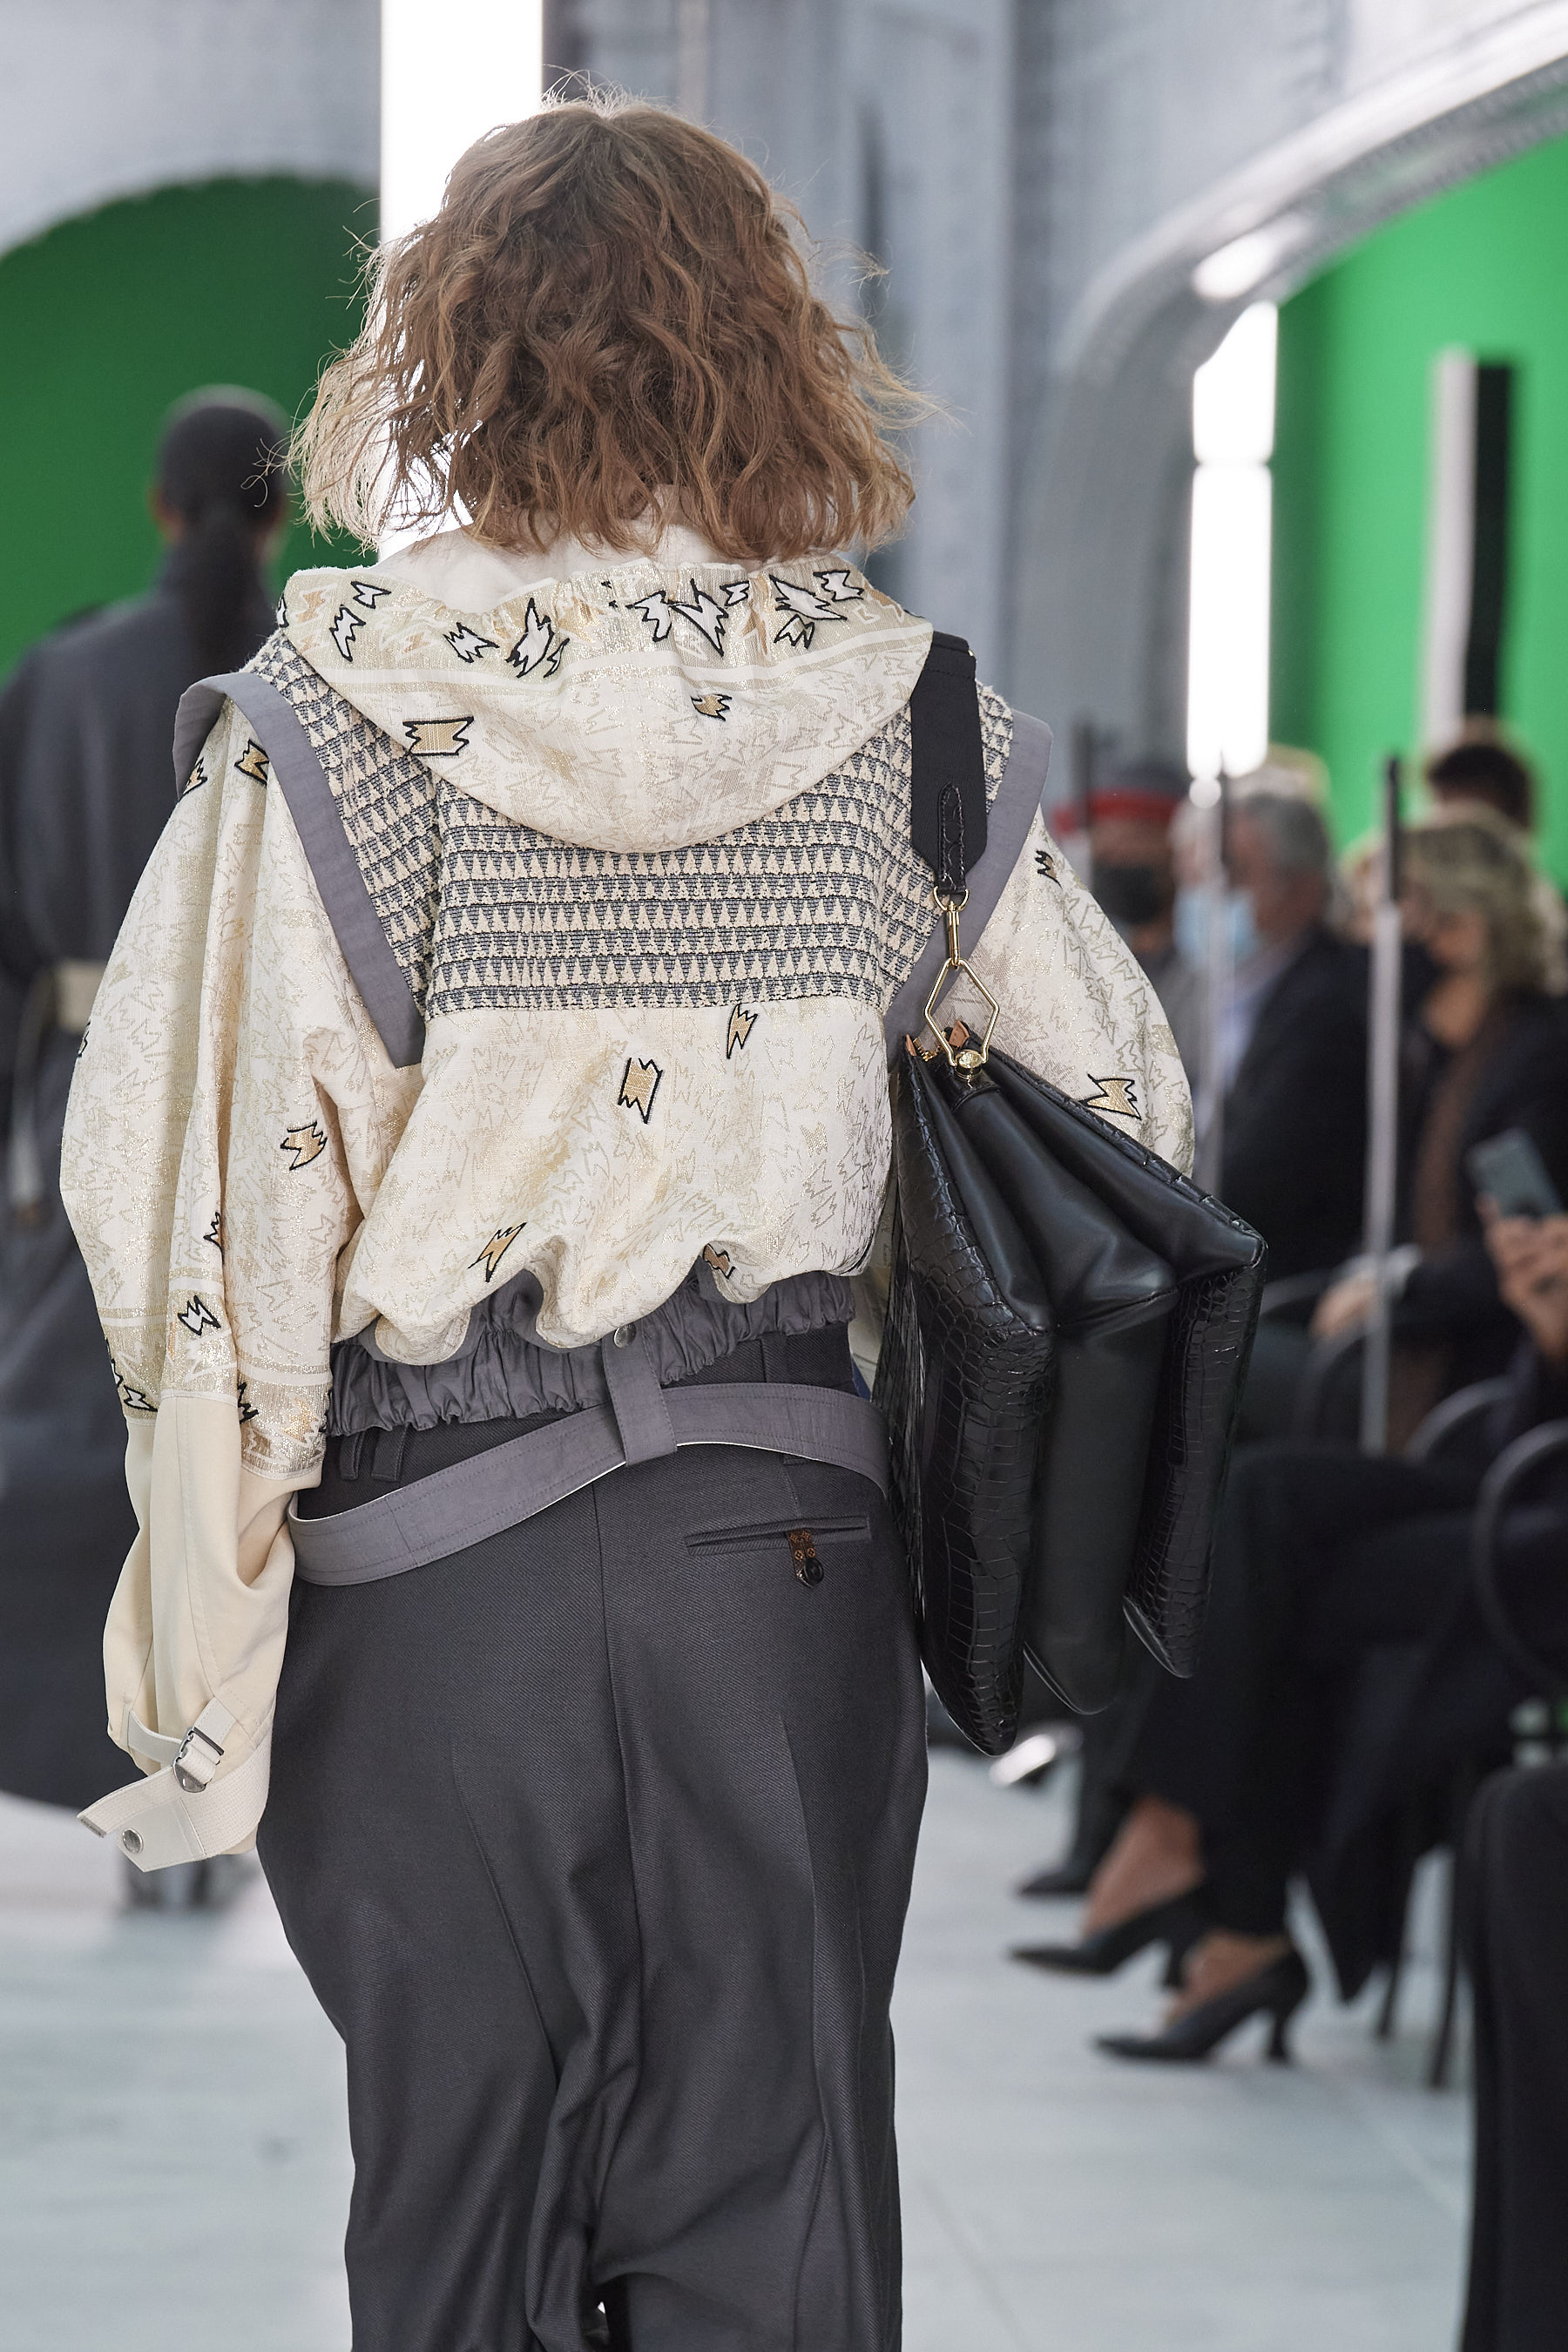 Chroma key from @louisvuitton. A new bag from @NicolasGhesquiere's